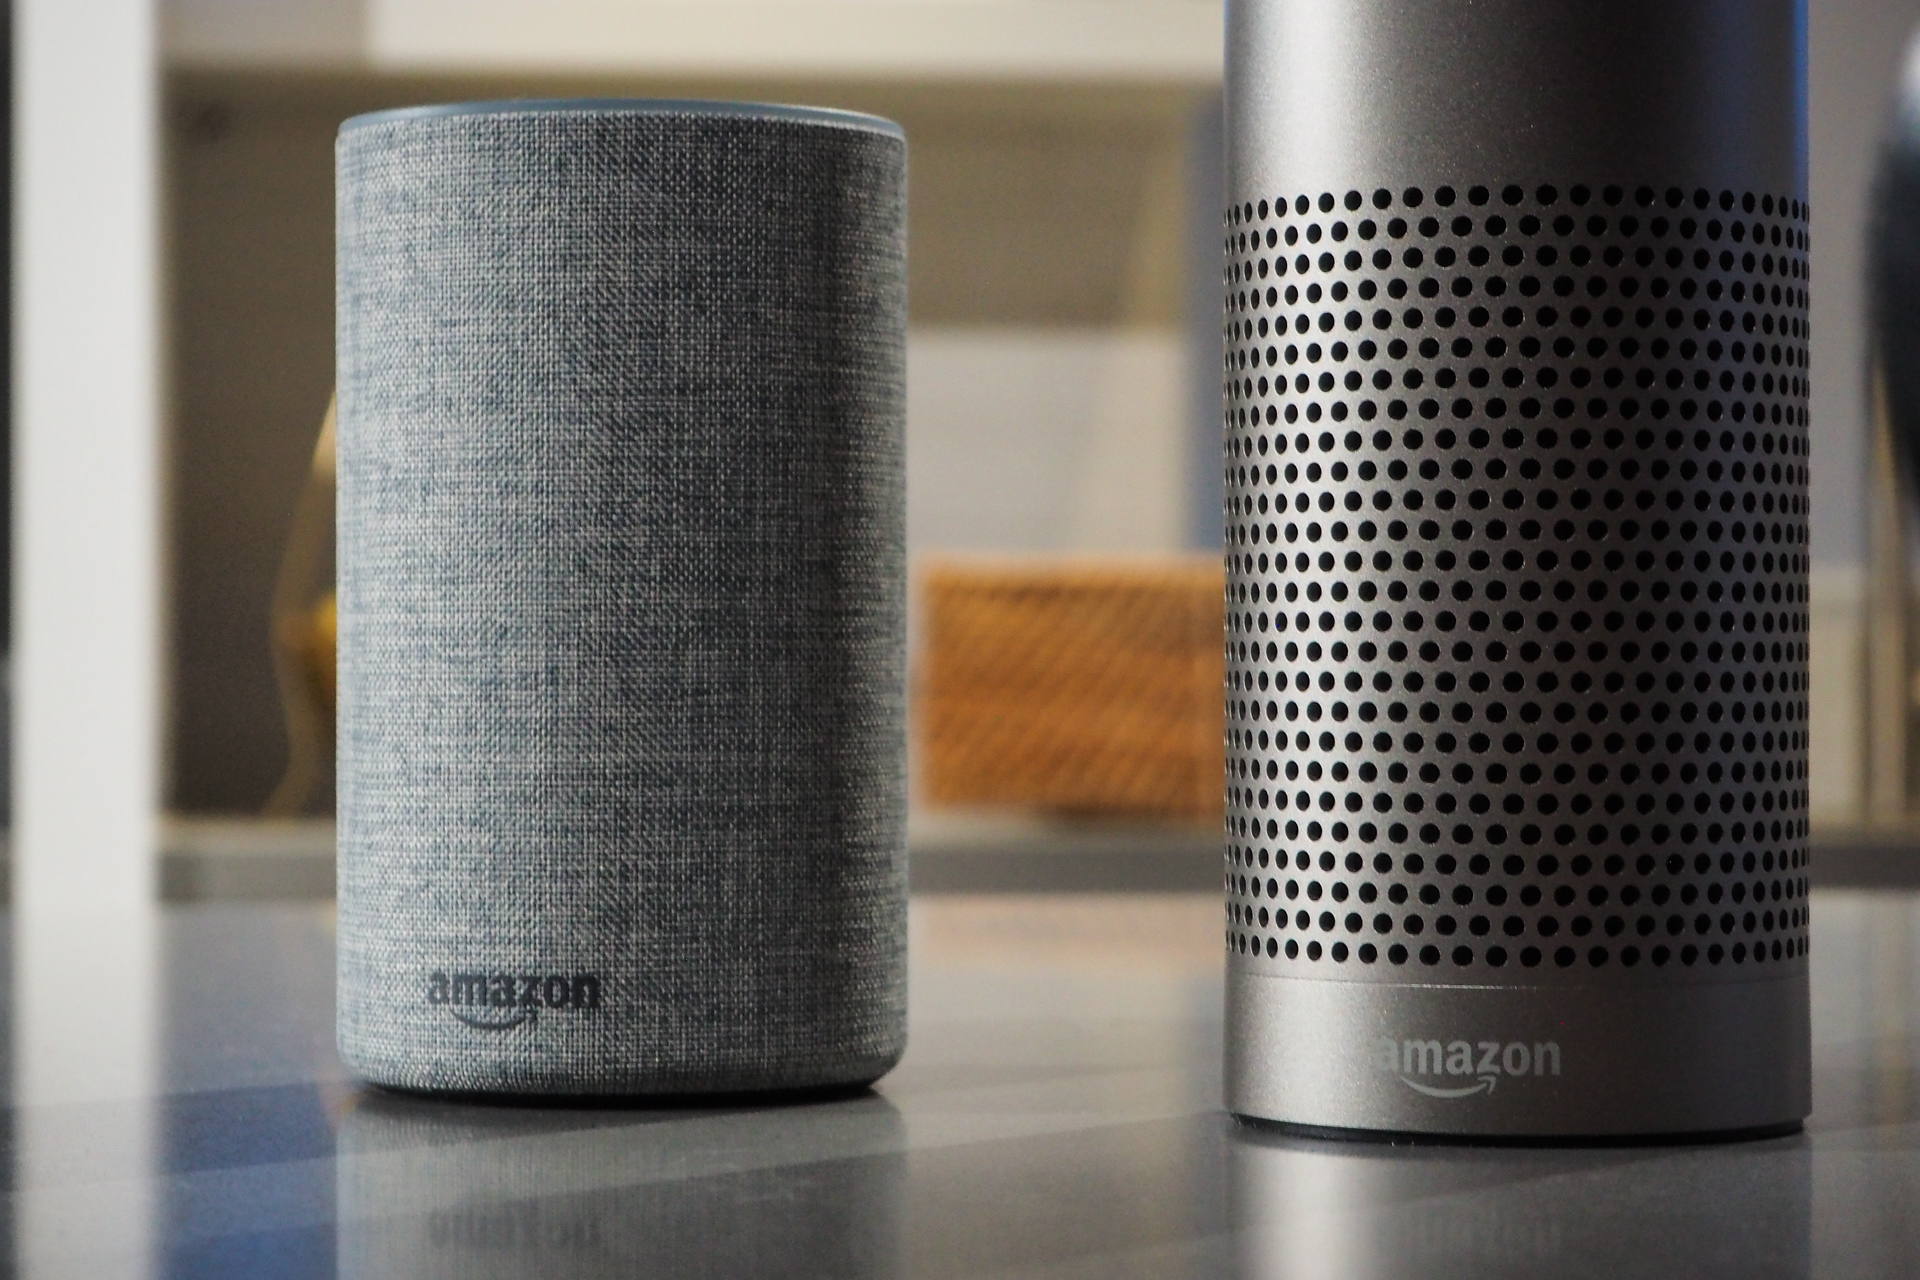 Amazon Echo, Echo Plus and Echo Dot are now shipping in India